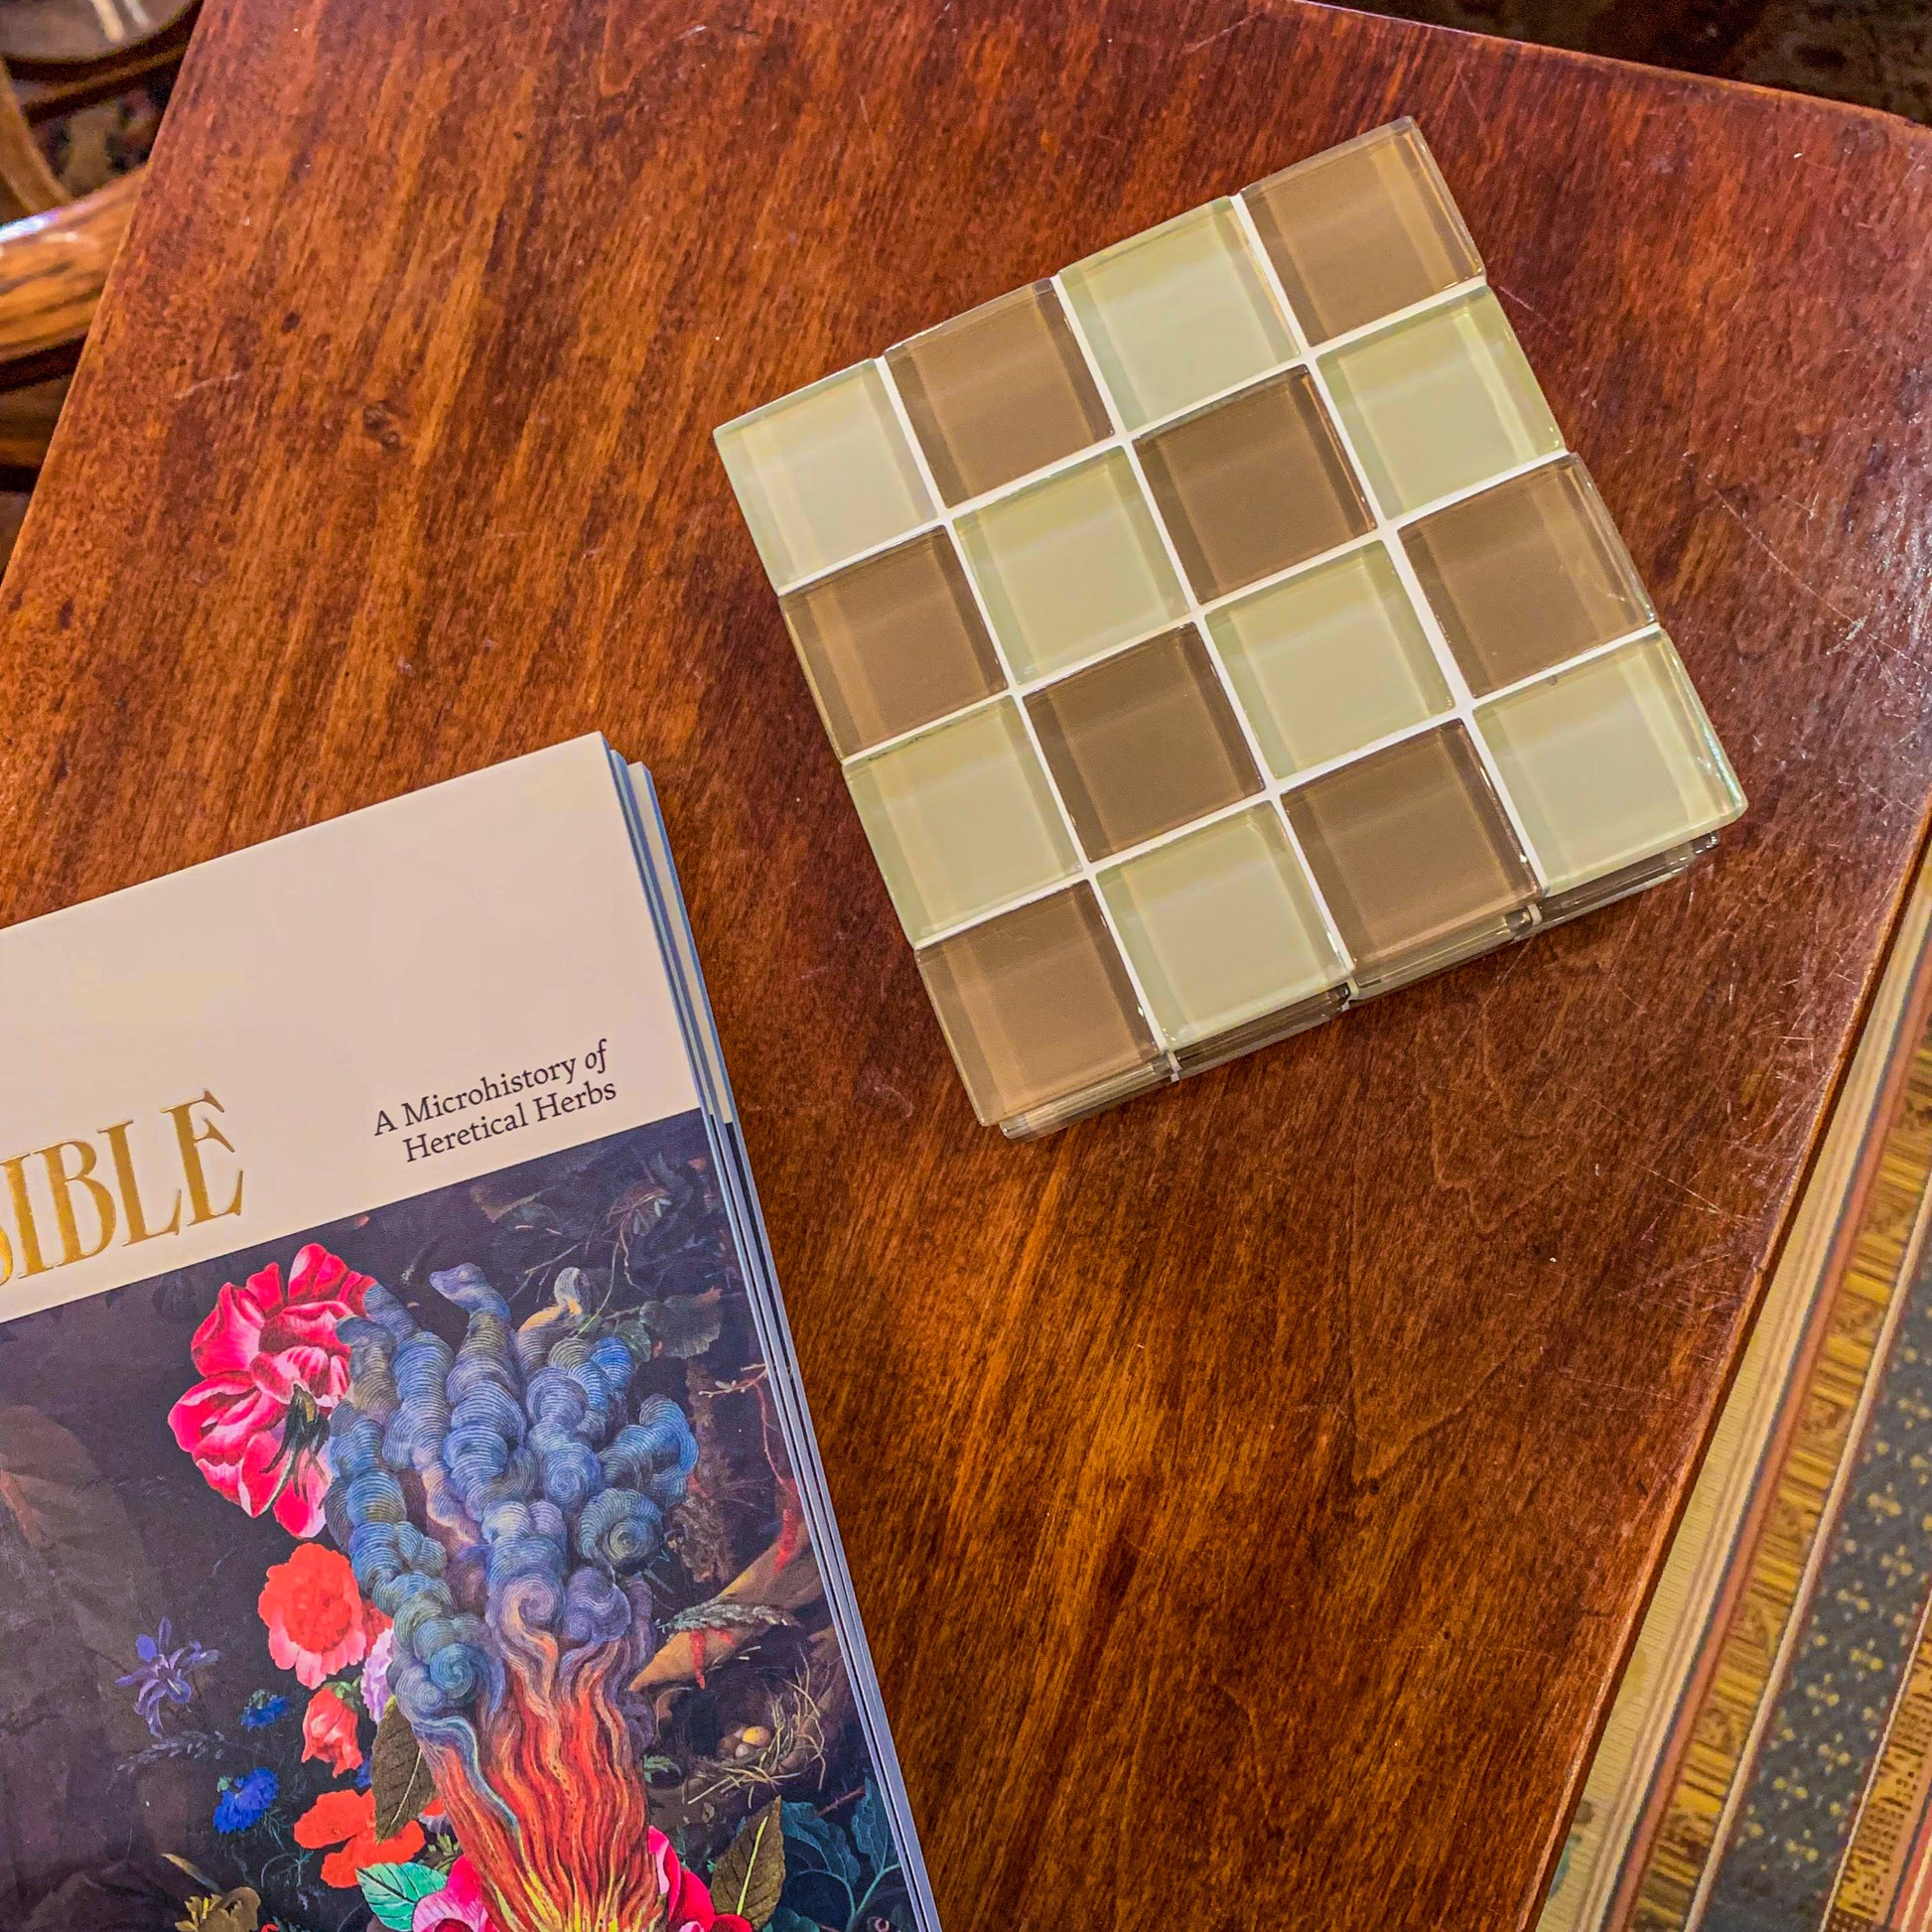 Subtle Art Studio Cafe Latte checkered coaster (tan & brown) on a wooden side table next to a book which reads “a microhistory of Heretical Herbs”